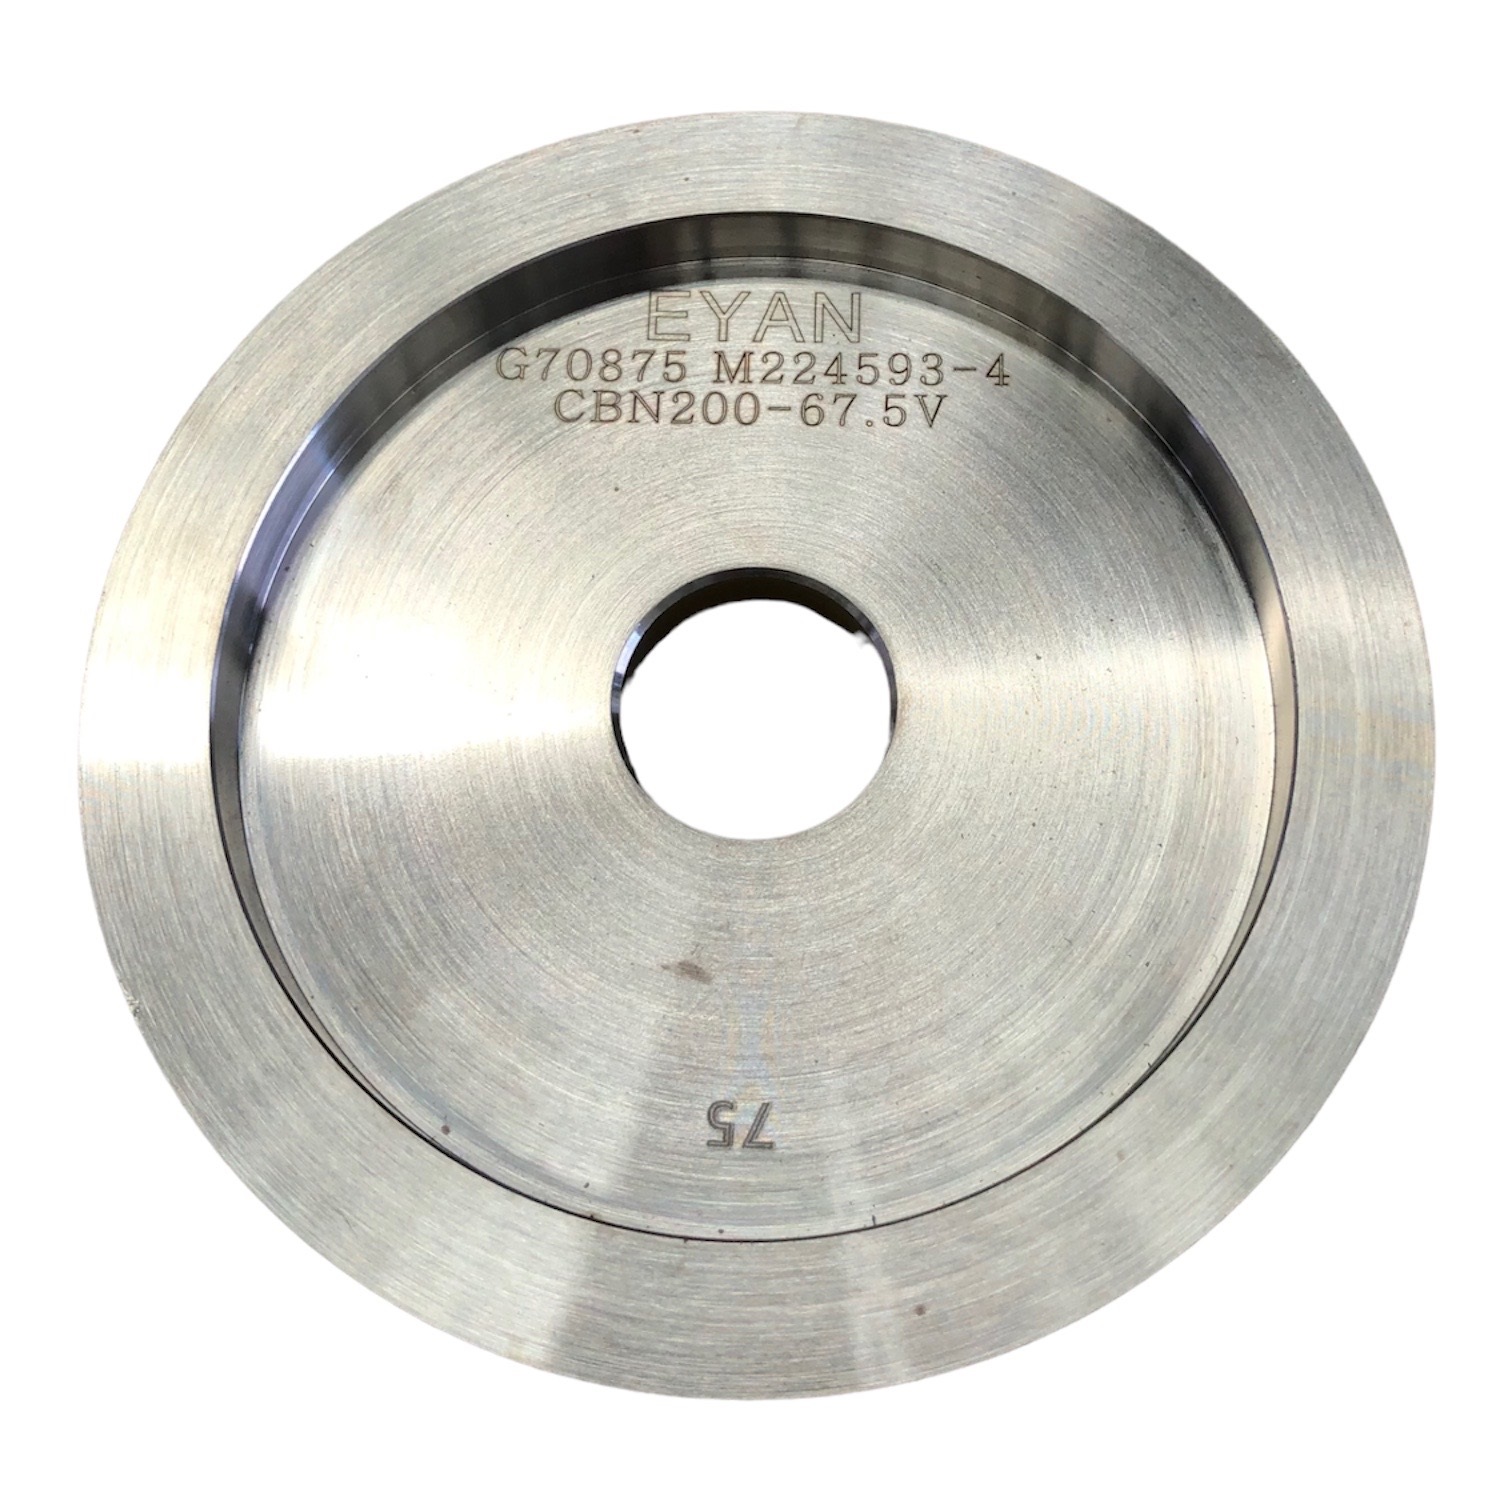 CBN Grinding Wheels for EY-32A/EY-32B/EY-32BL